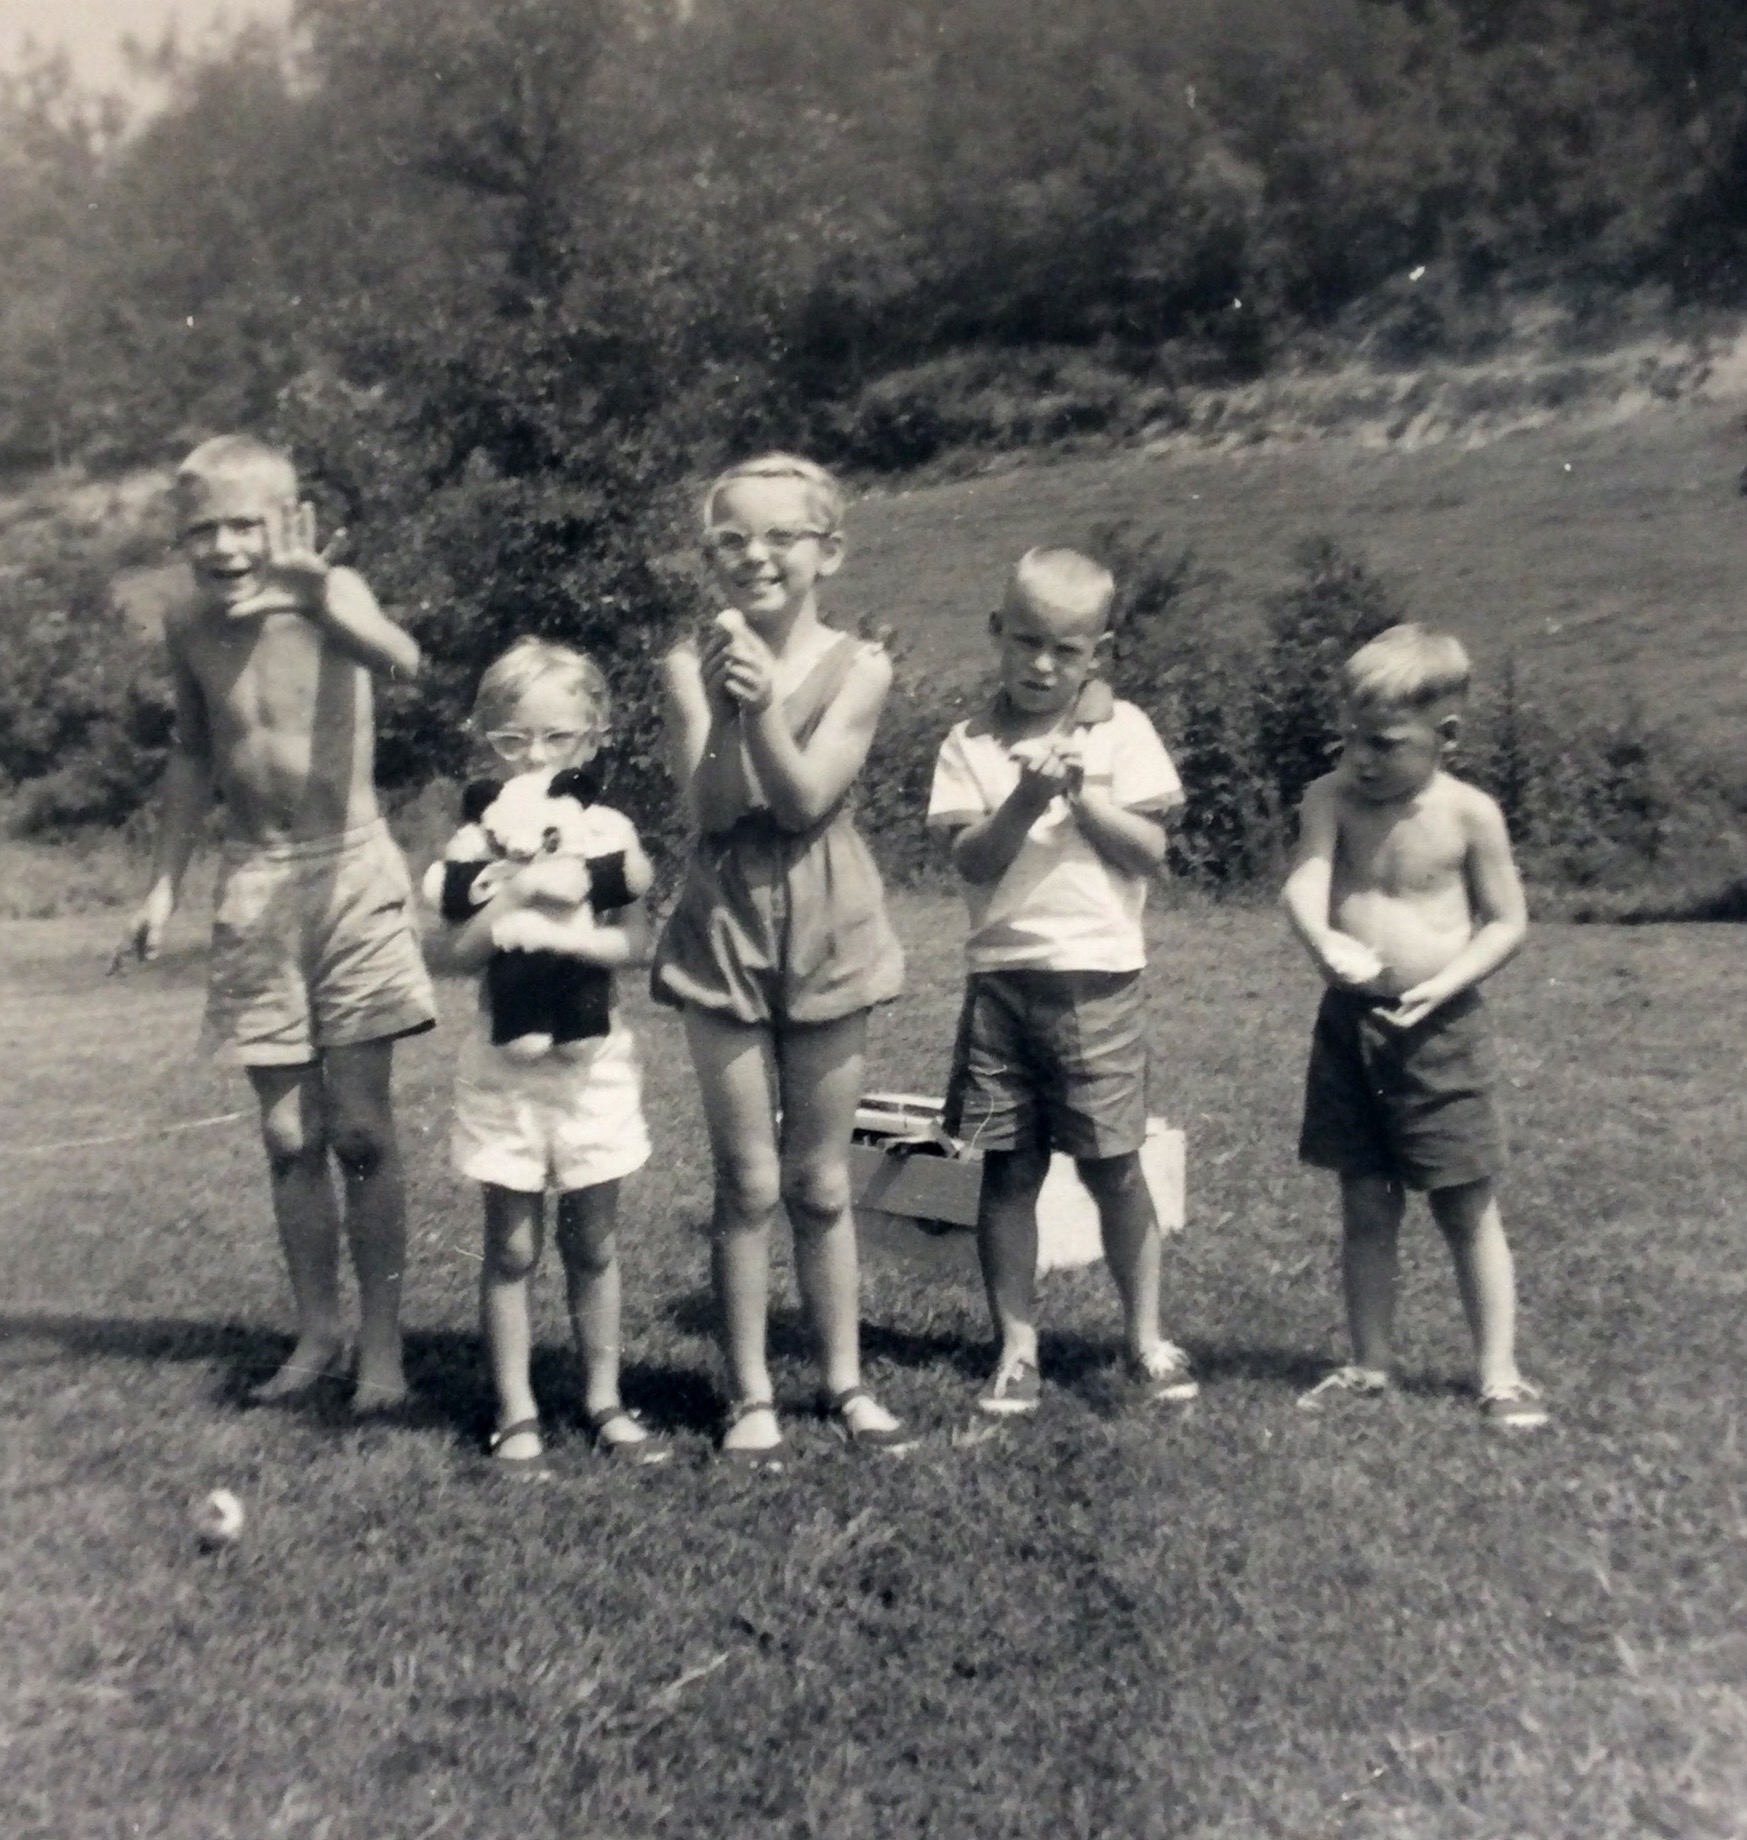 Spending time with family in Tn 1958 or 1959 